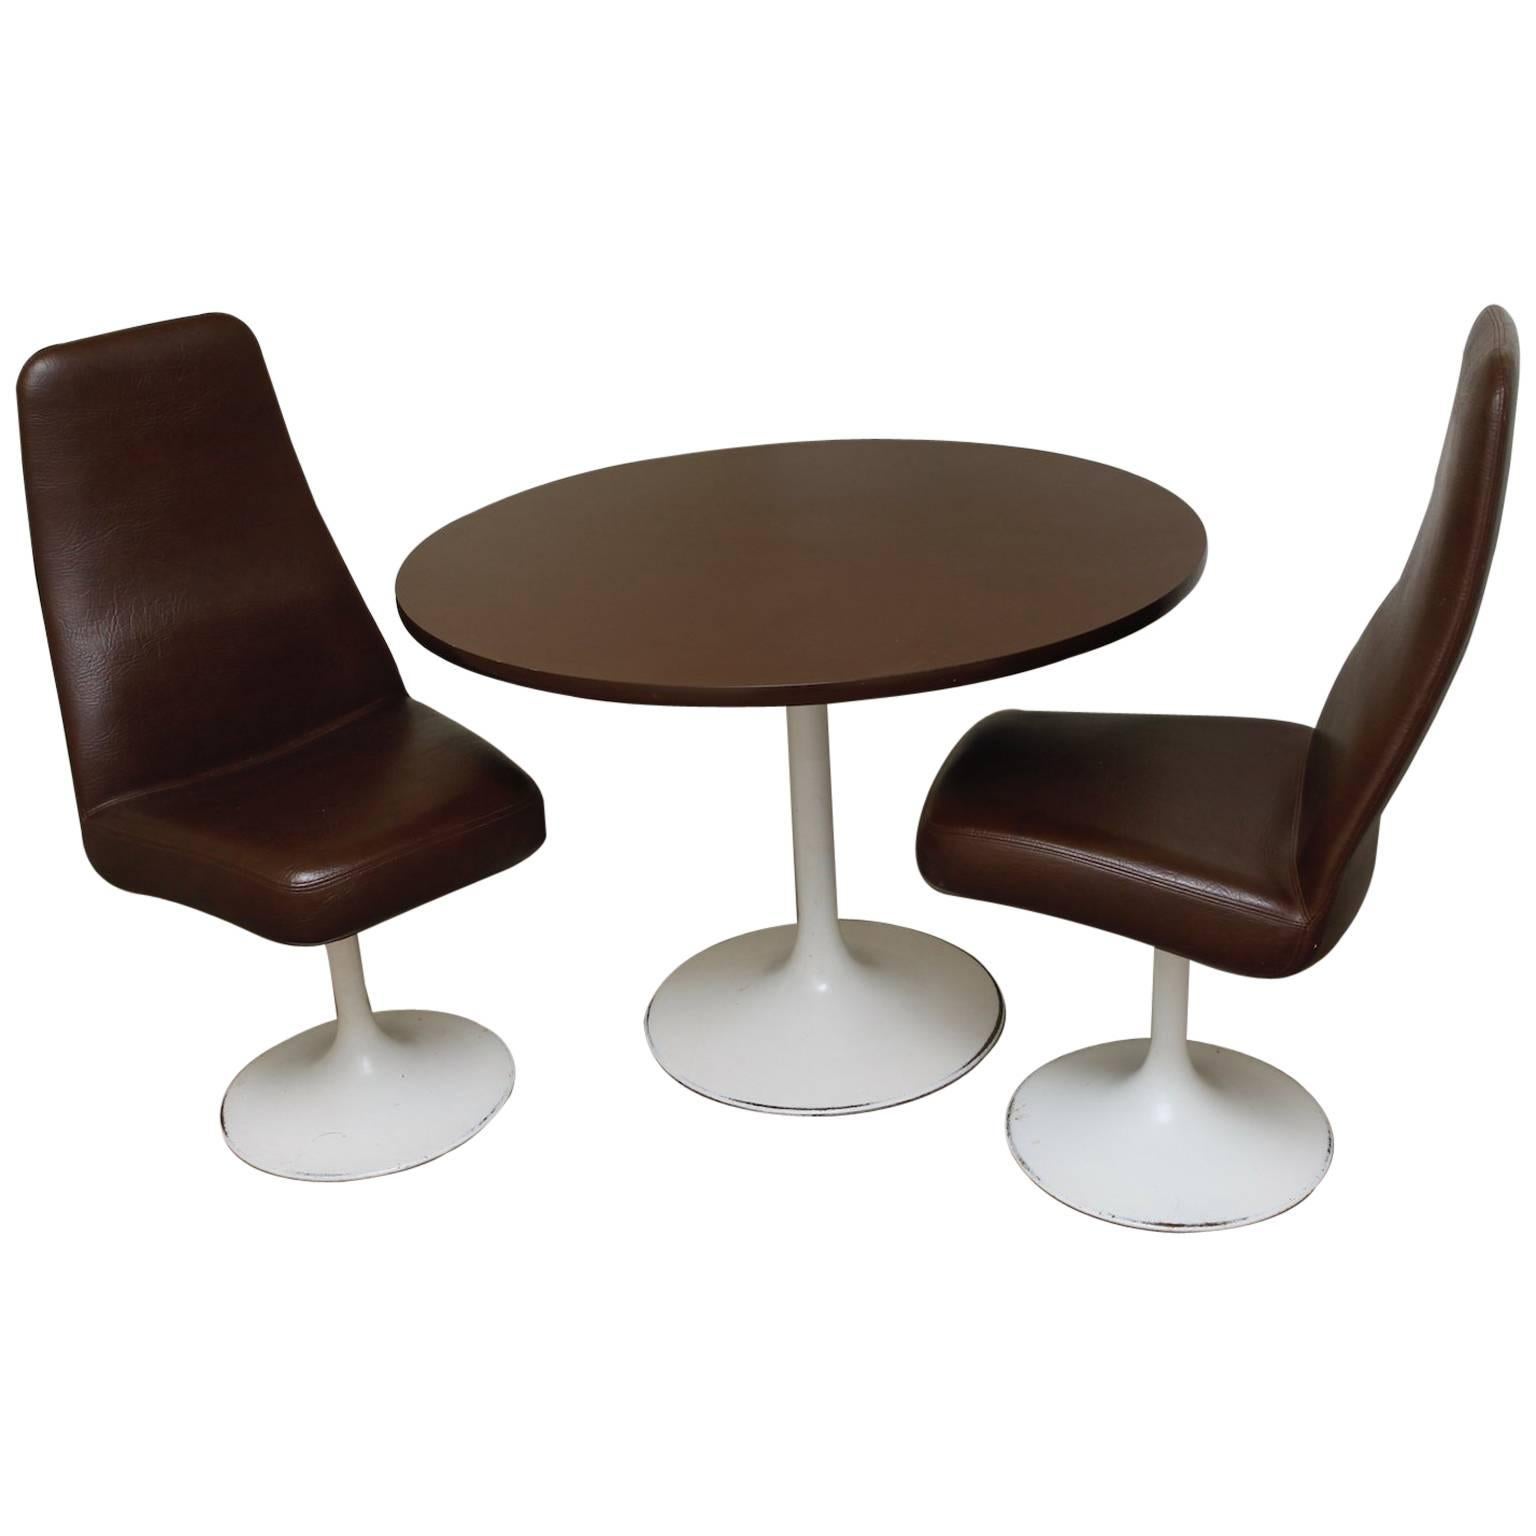 Two Chairs with Matching Table and Tulip foot by Johanson Design, Sweden, 1970s For Sale